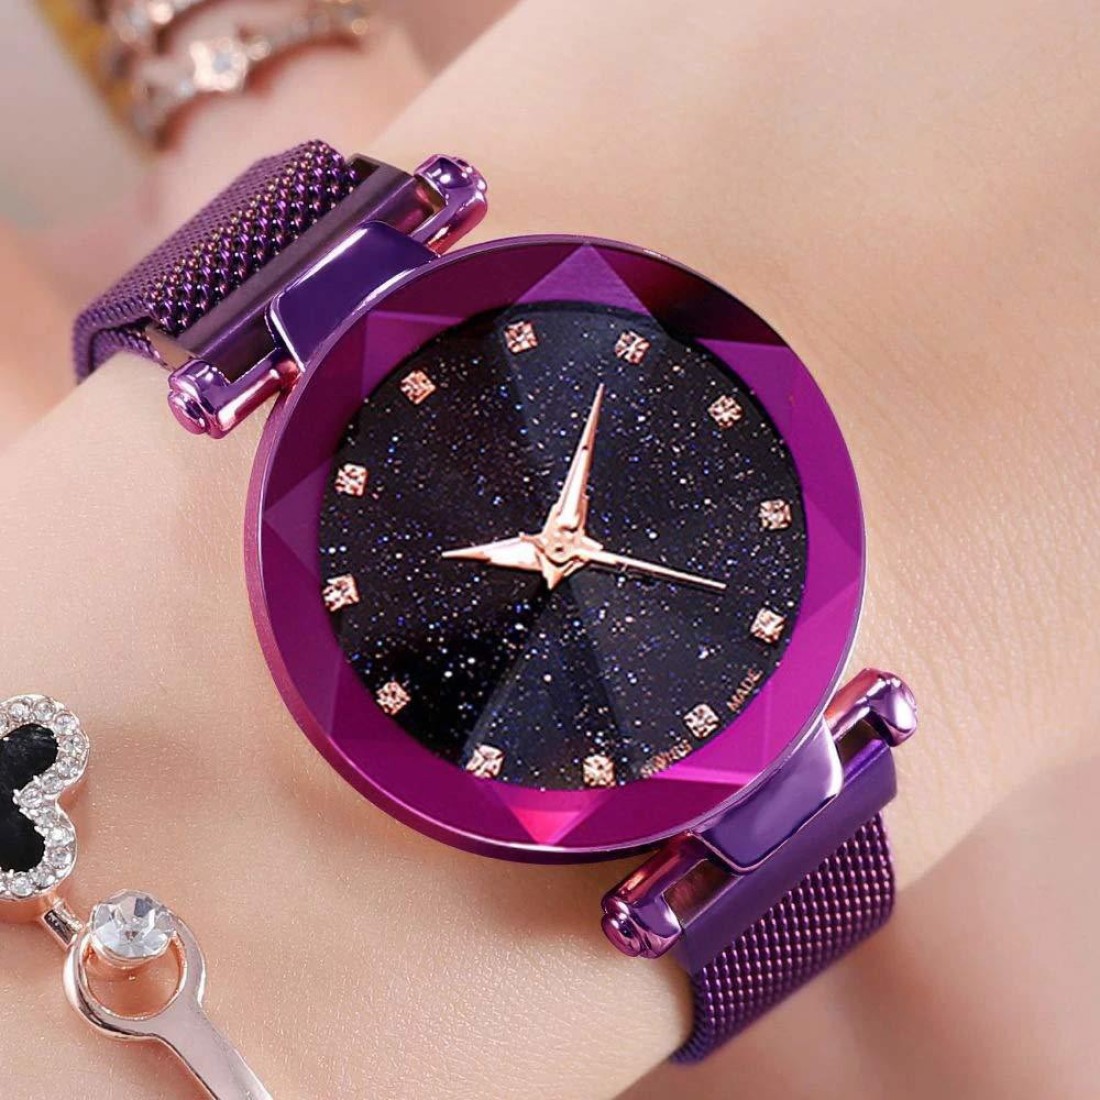 KBL Analogue Womens Watch (Purple Colored Strap) Analogue Womens Watch (Purple Colored Strap) (Pack of 1) Analog Watch - For Women